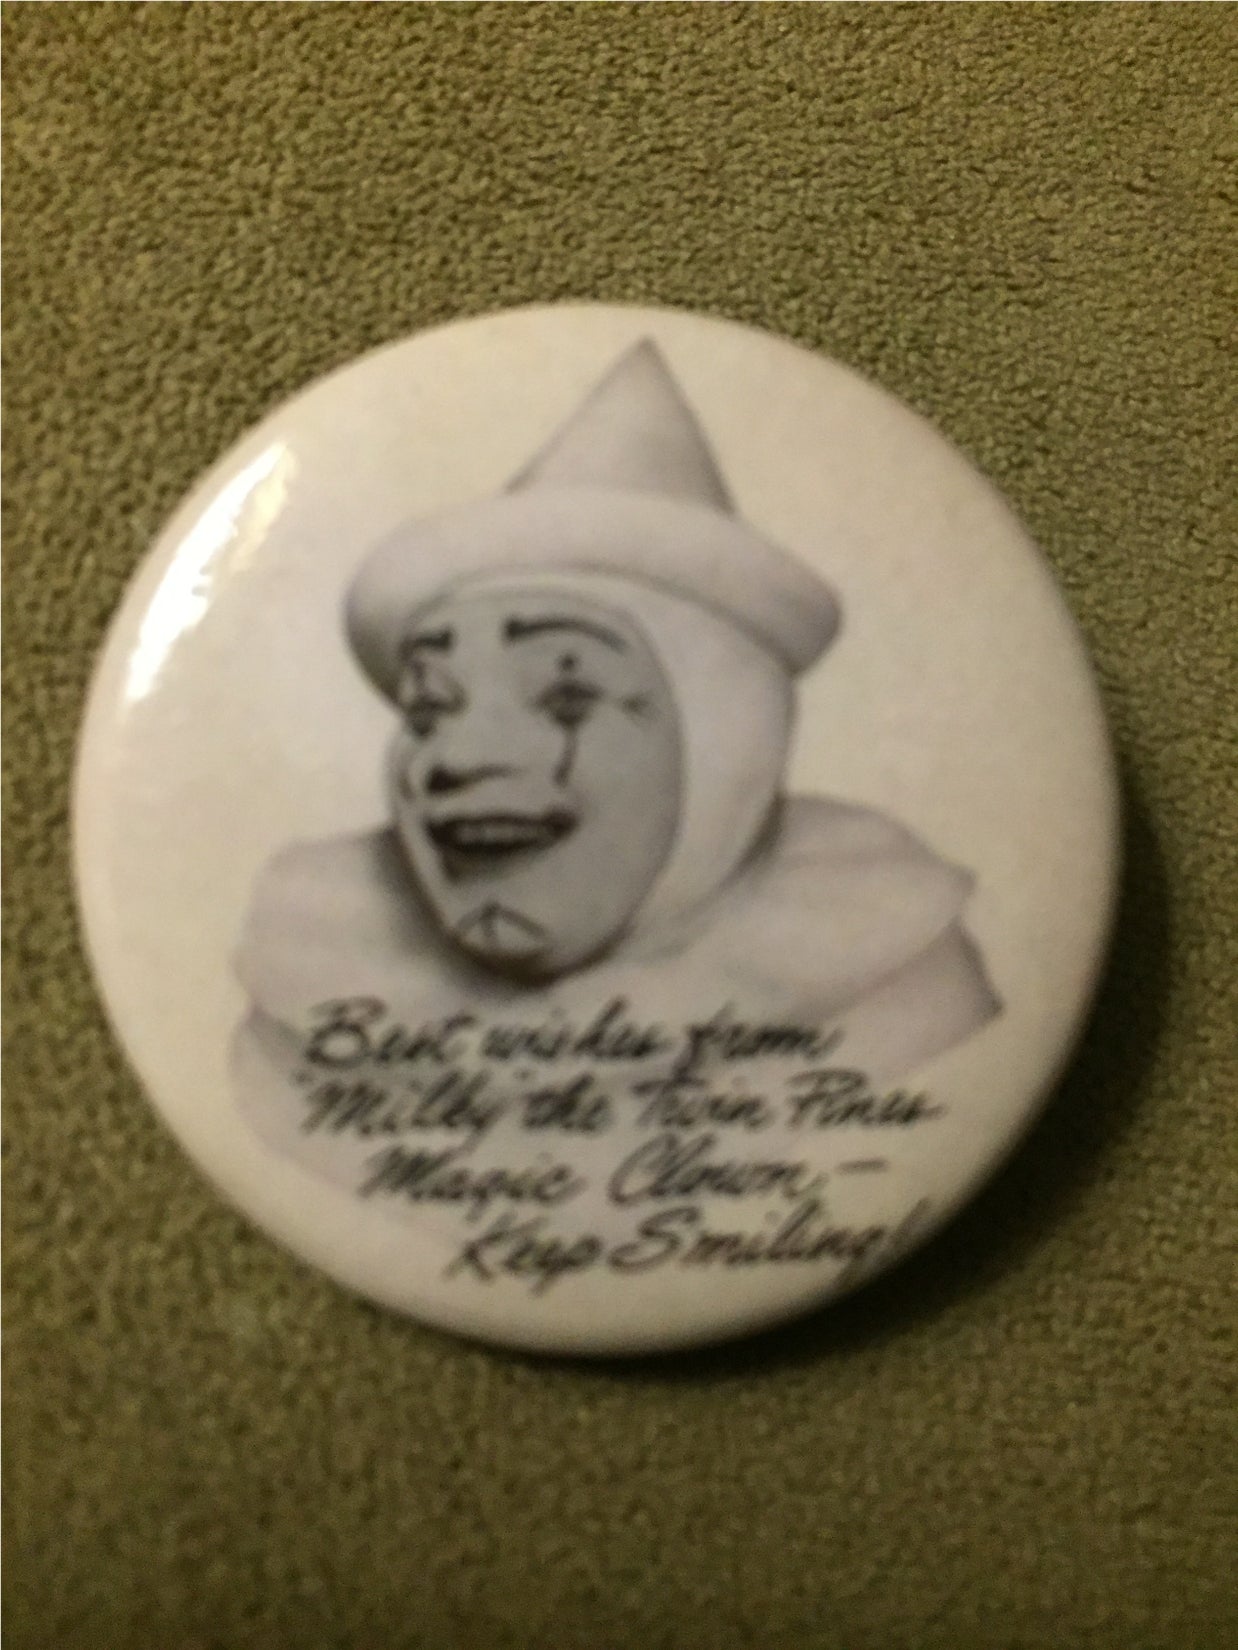 Milky The Clown / Twin Pines 1.5" pinback button